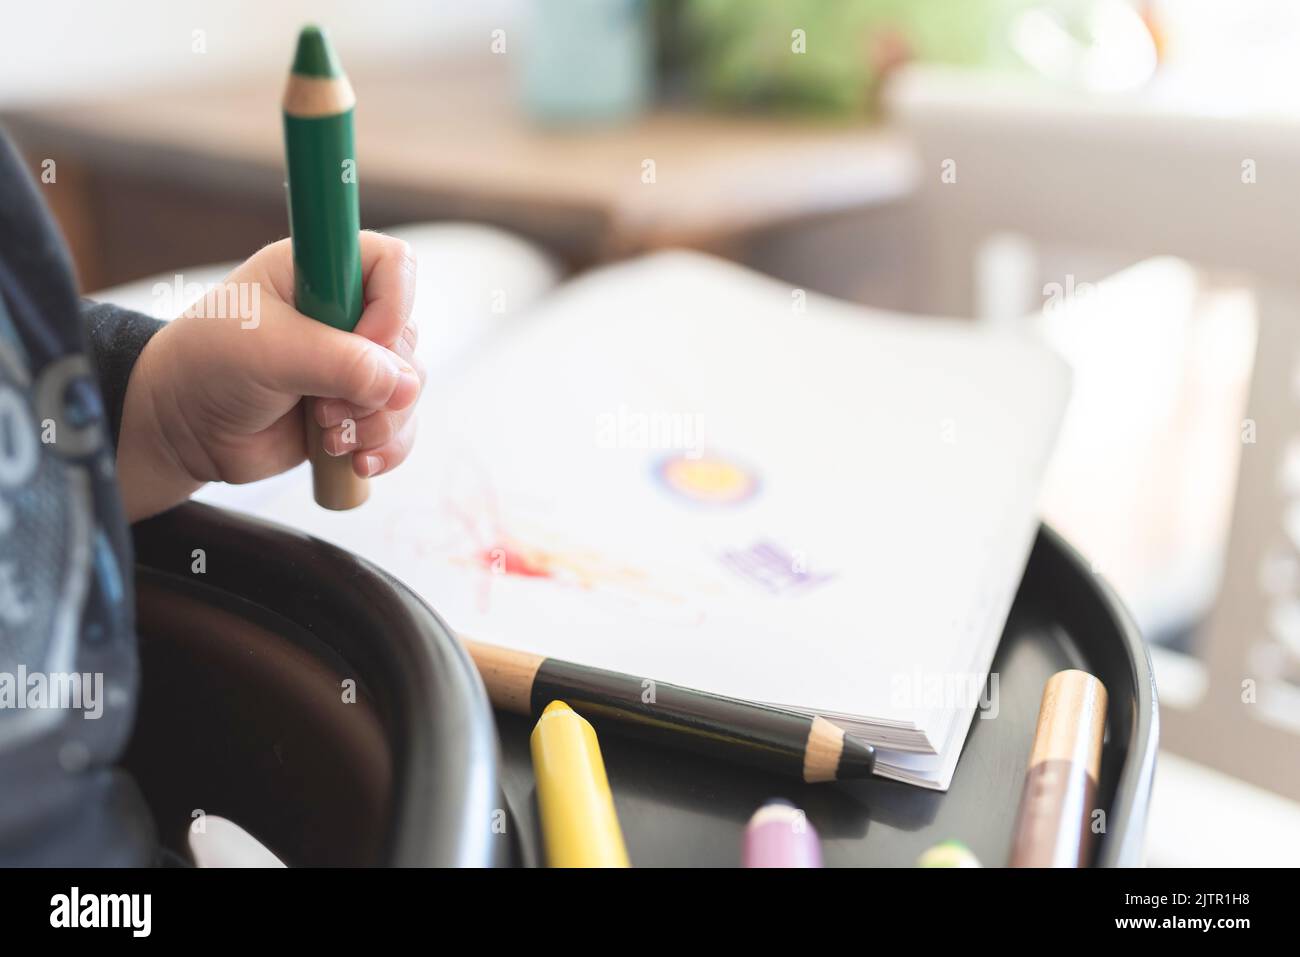 close-up view of toddler using crayons to draw a picture Stock Photo